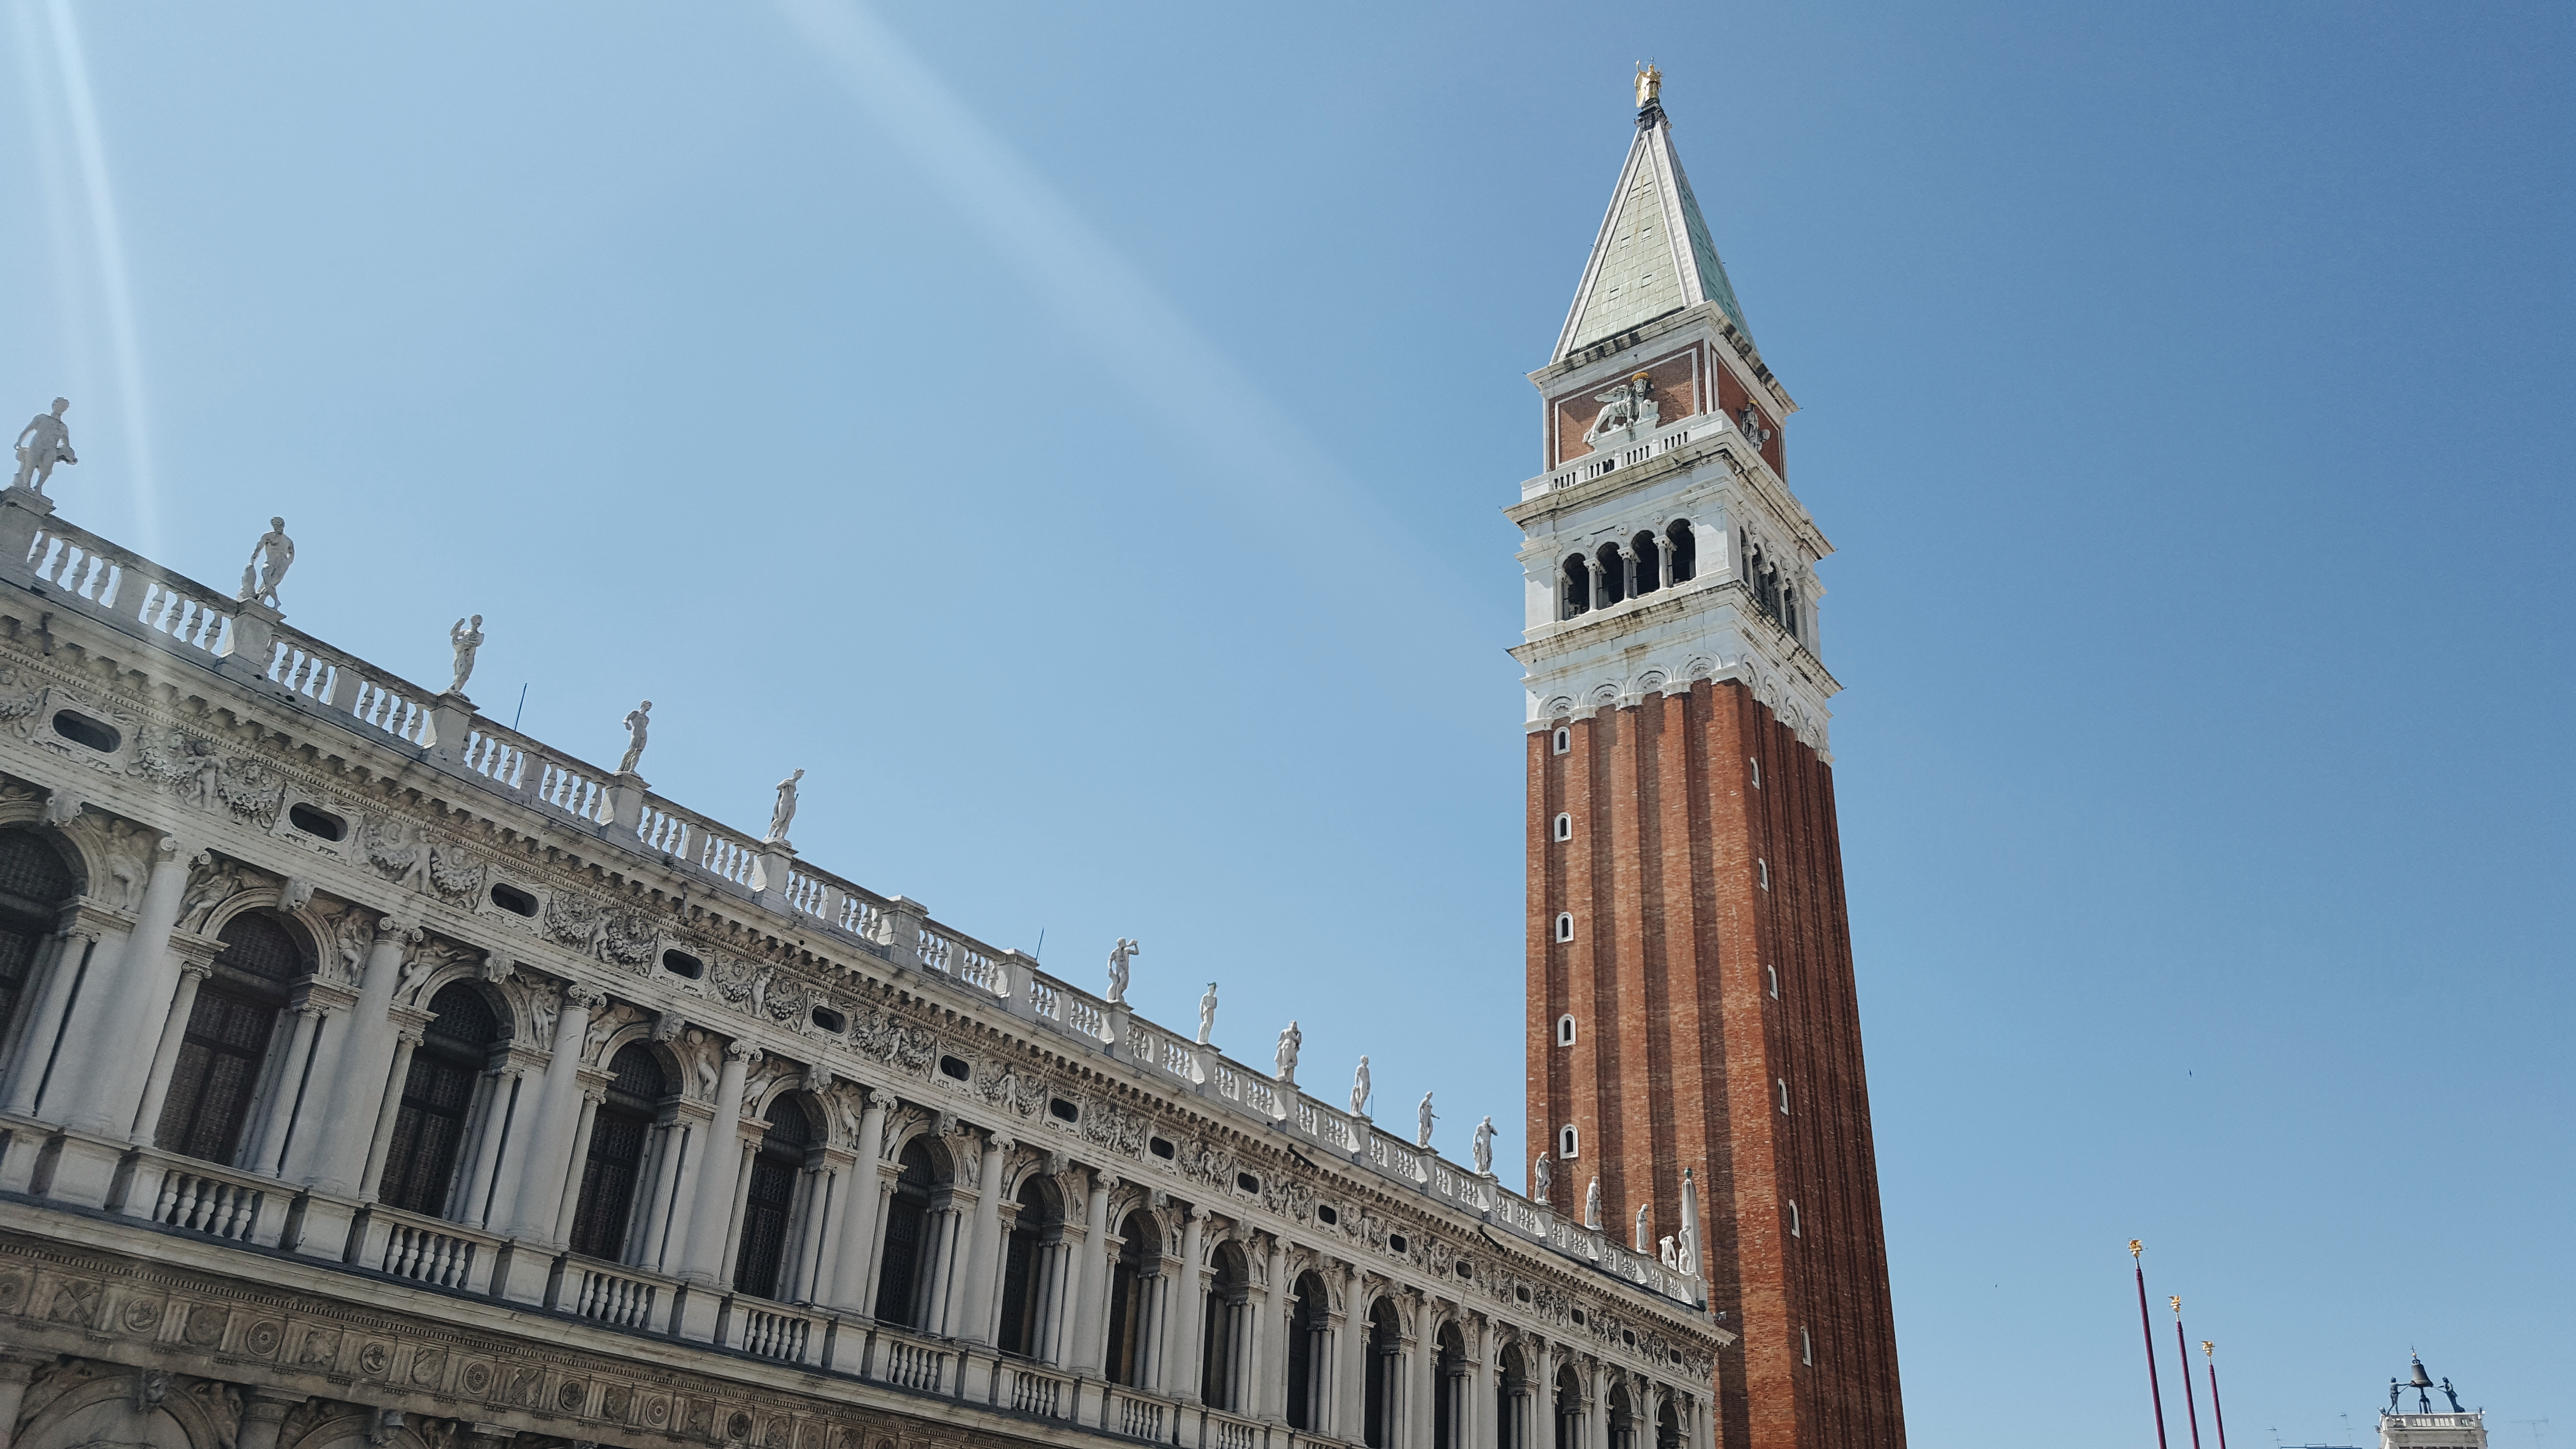 A view of the Piazza San Marco in Venice, Italy